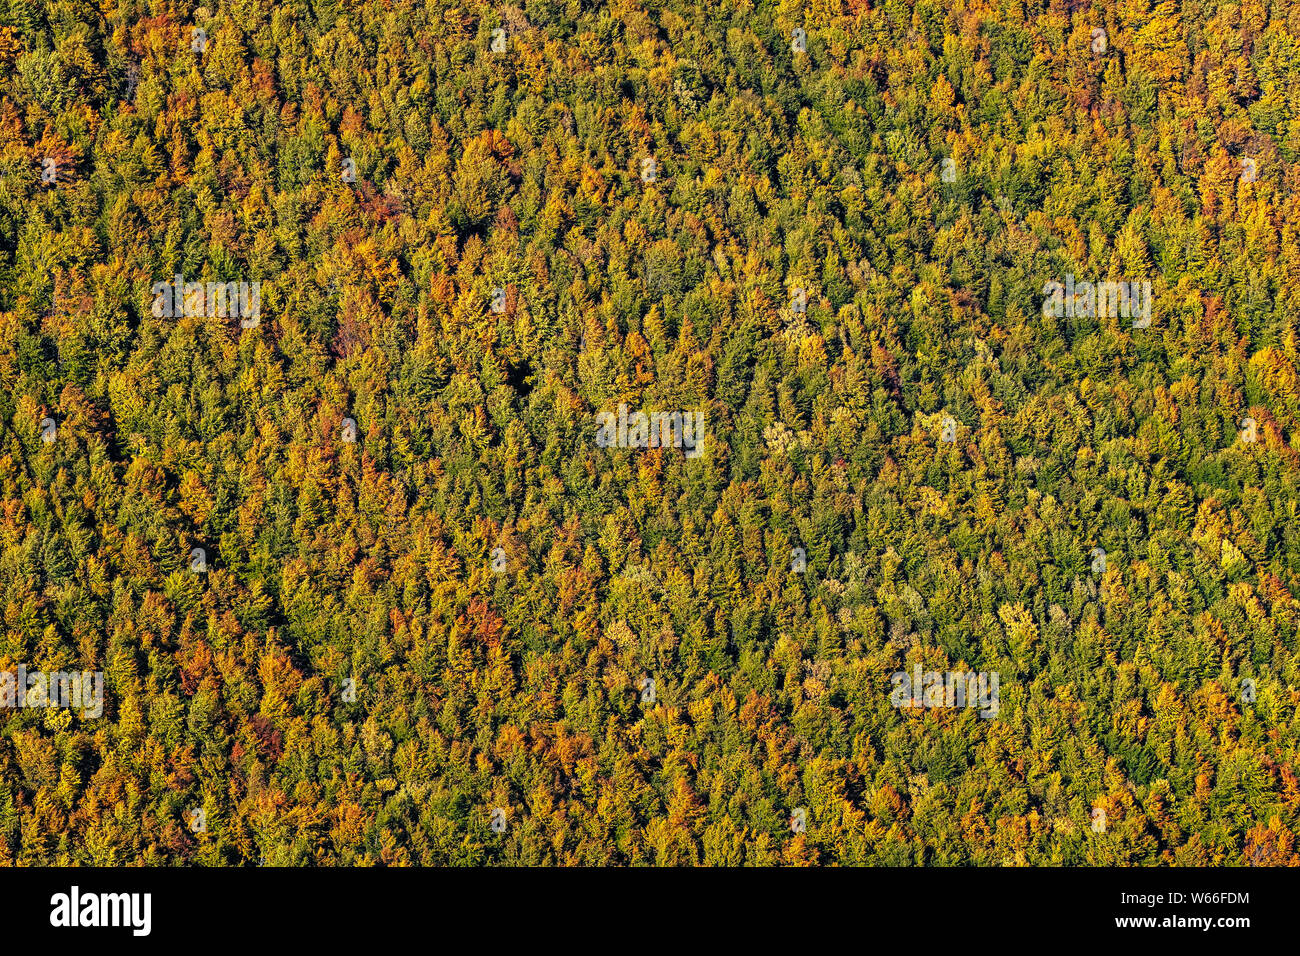 Beautiful yellow, orange and green autumn forest, many trees on the orange hills Stock Photo